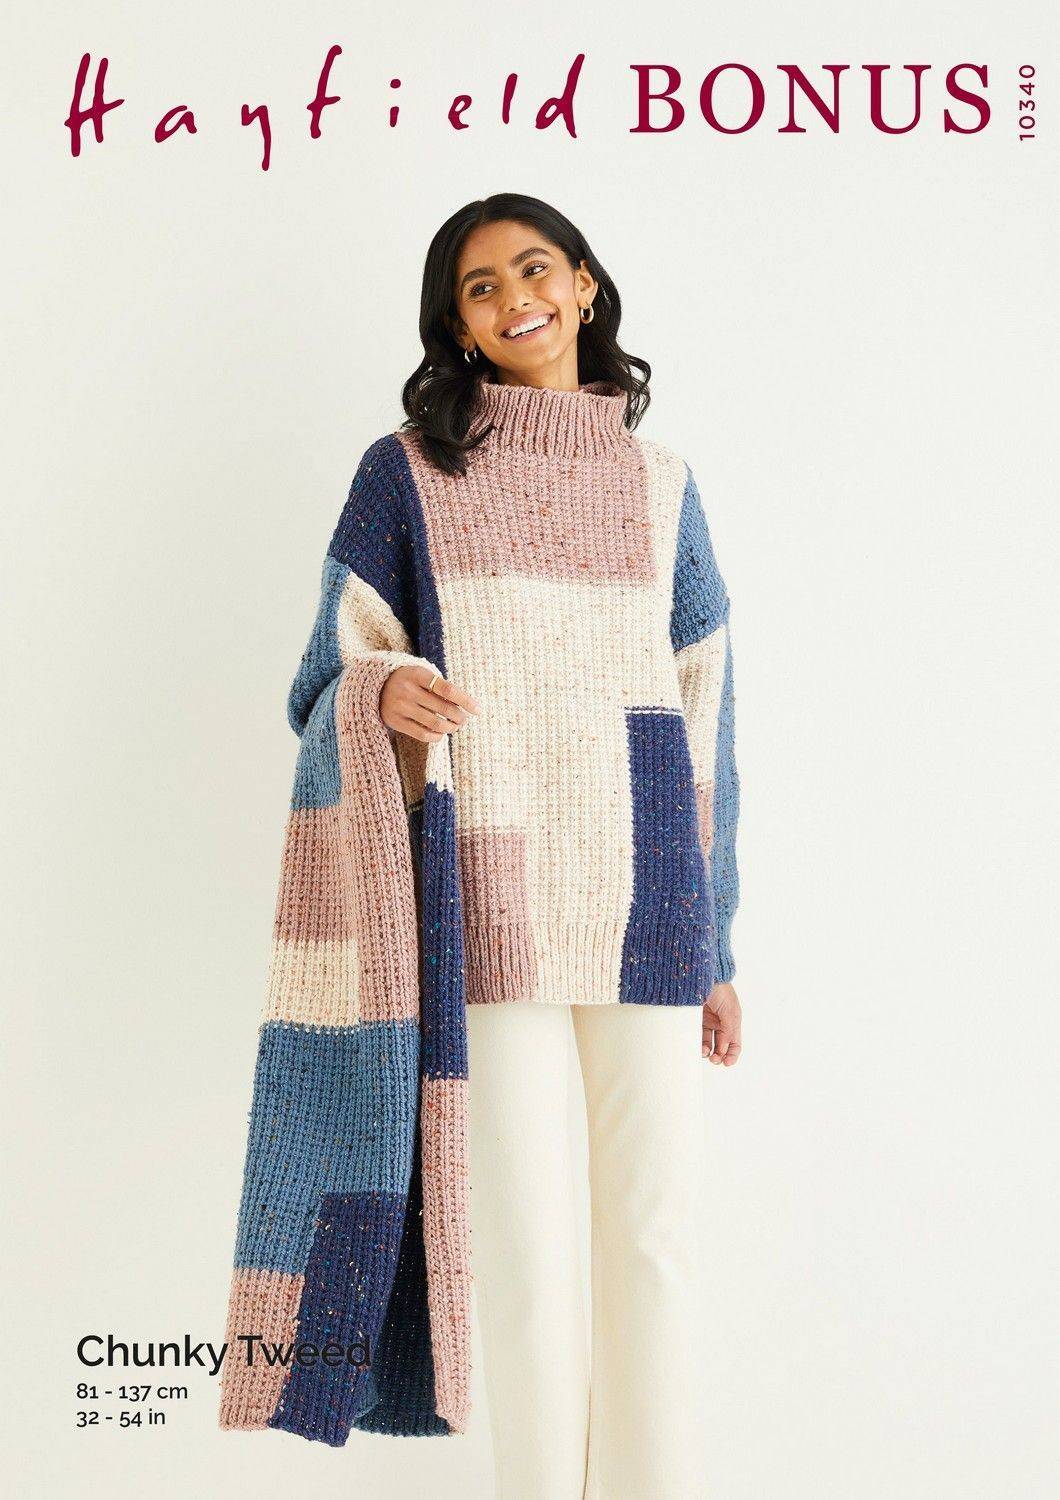 Sweater and Scarf in Hayfield Bonus Chunky Tweed (10340) | The Knitting ...